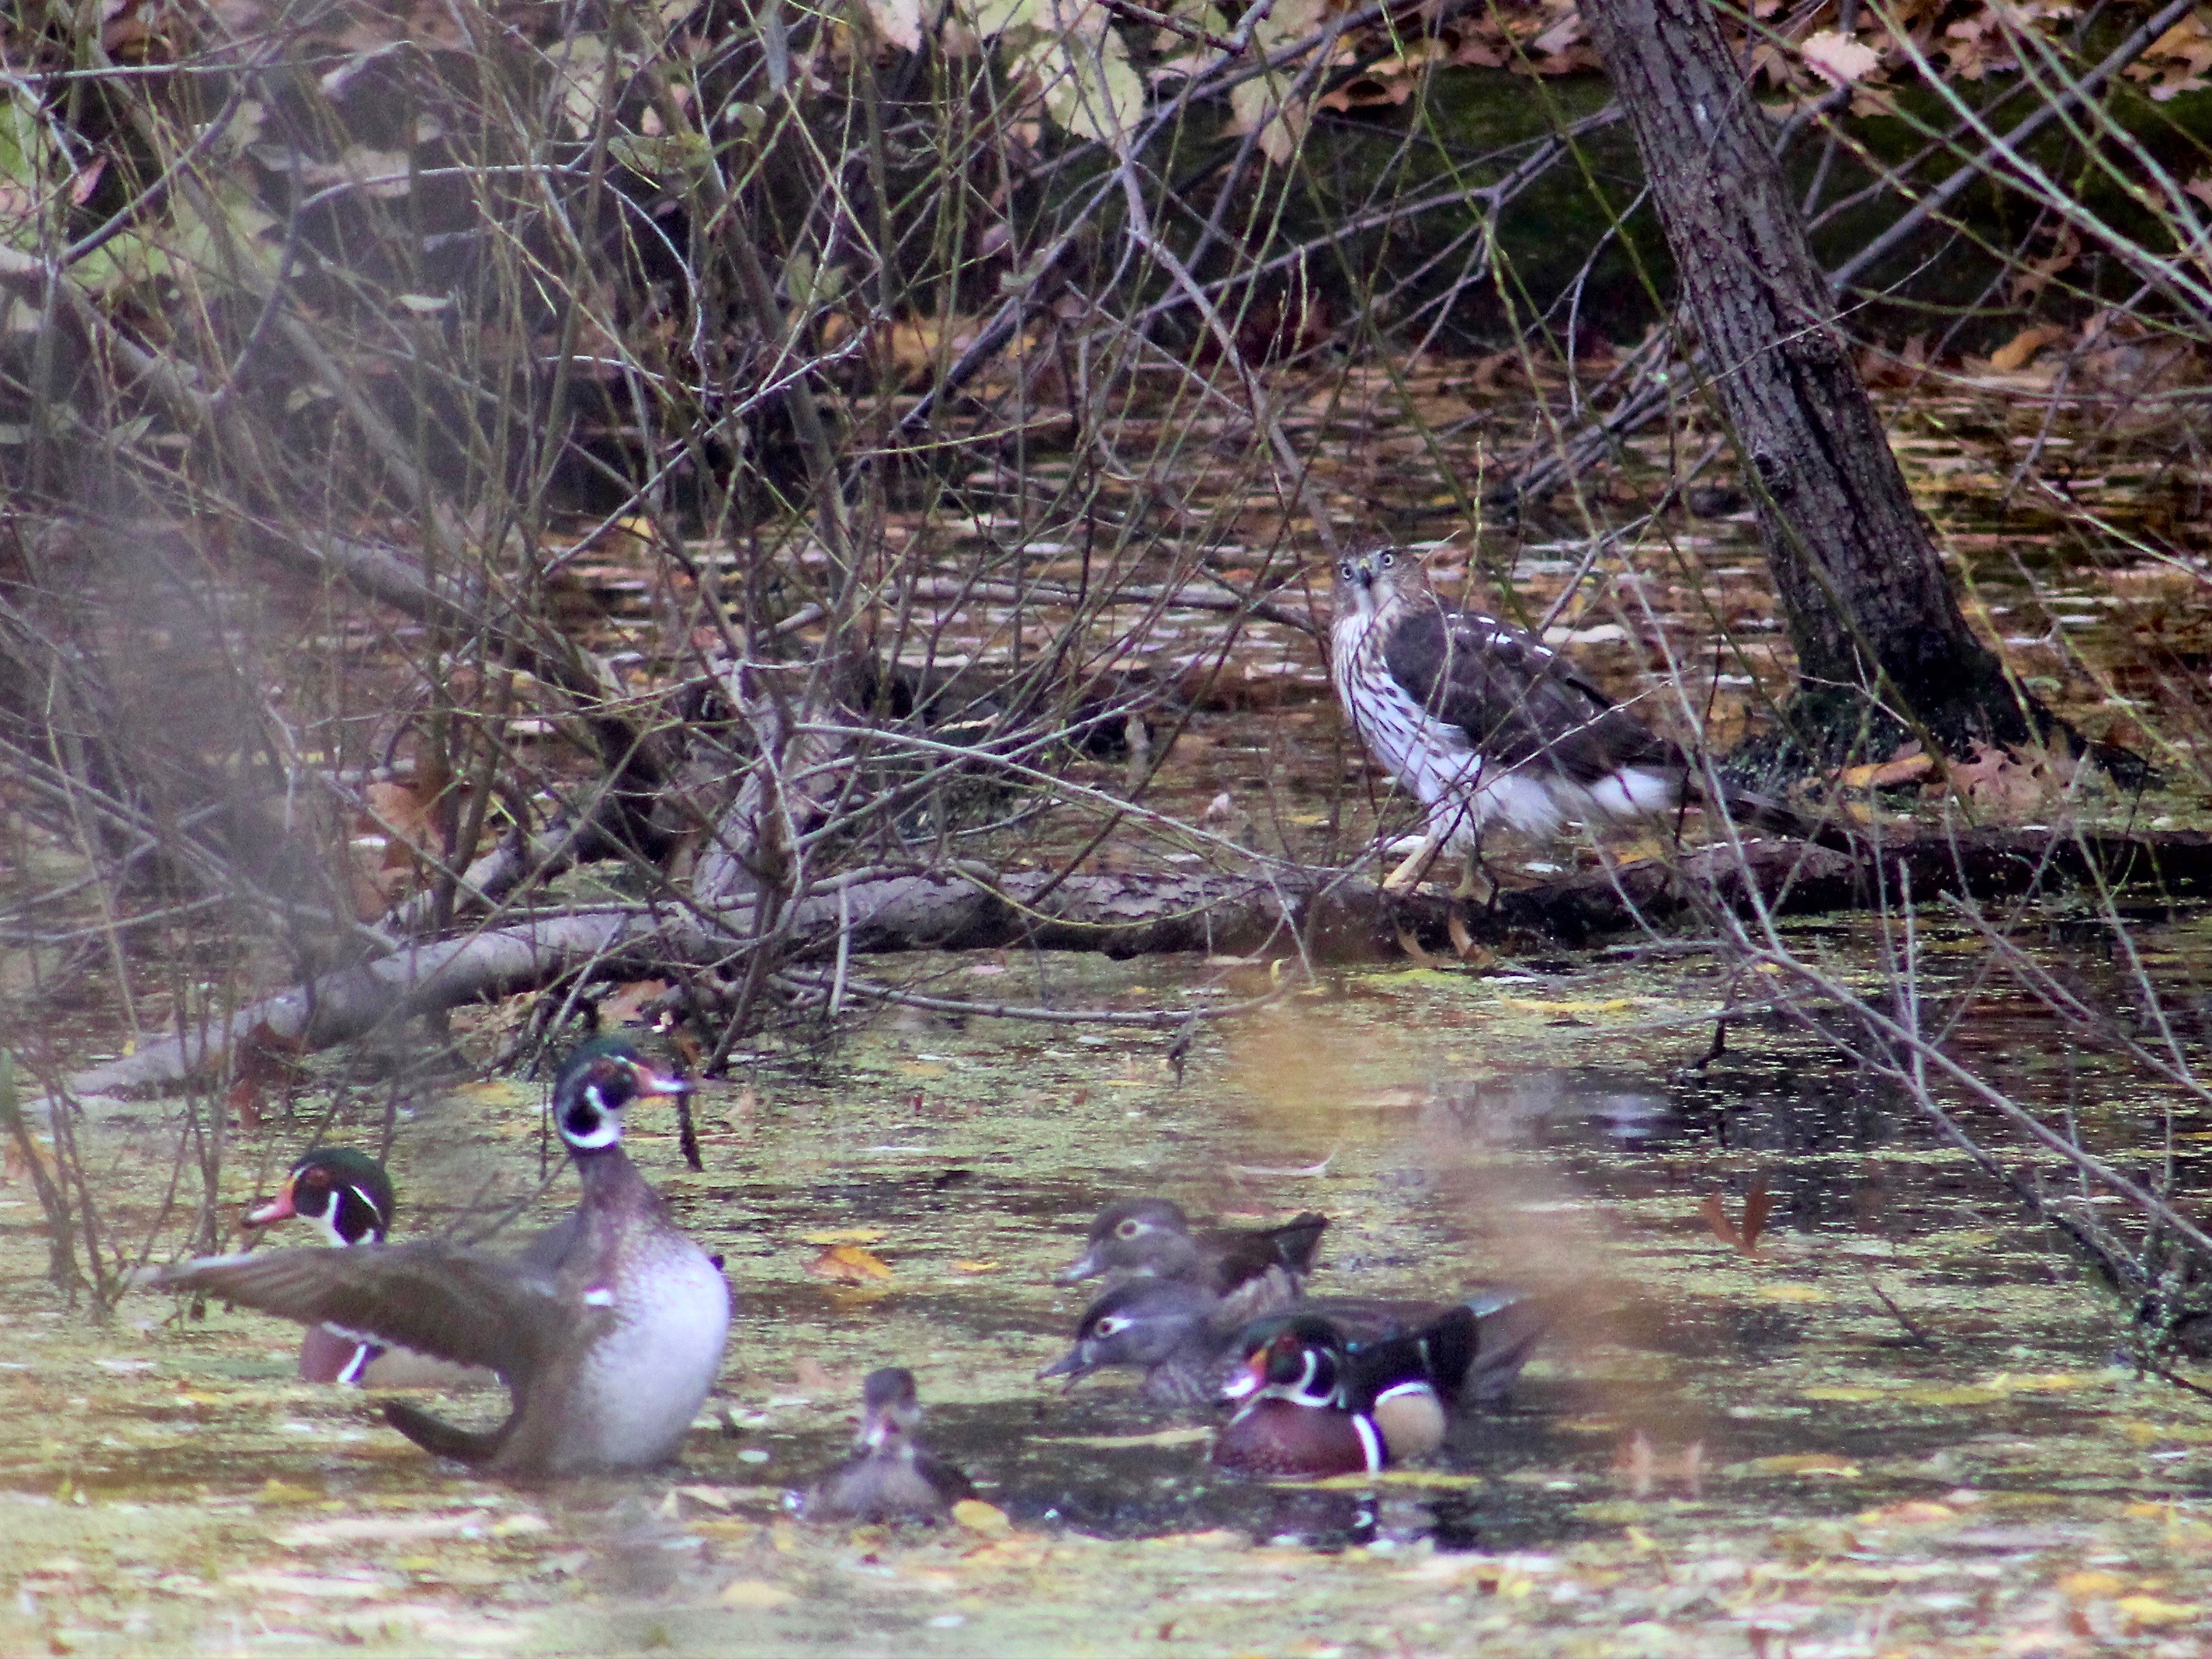 An immature Cooper’s Hawk observes a group of Wood Ducks on the Prospect Park Lake; both species breed in the park. Photo: Ryan F. Mandelbaum